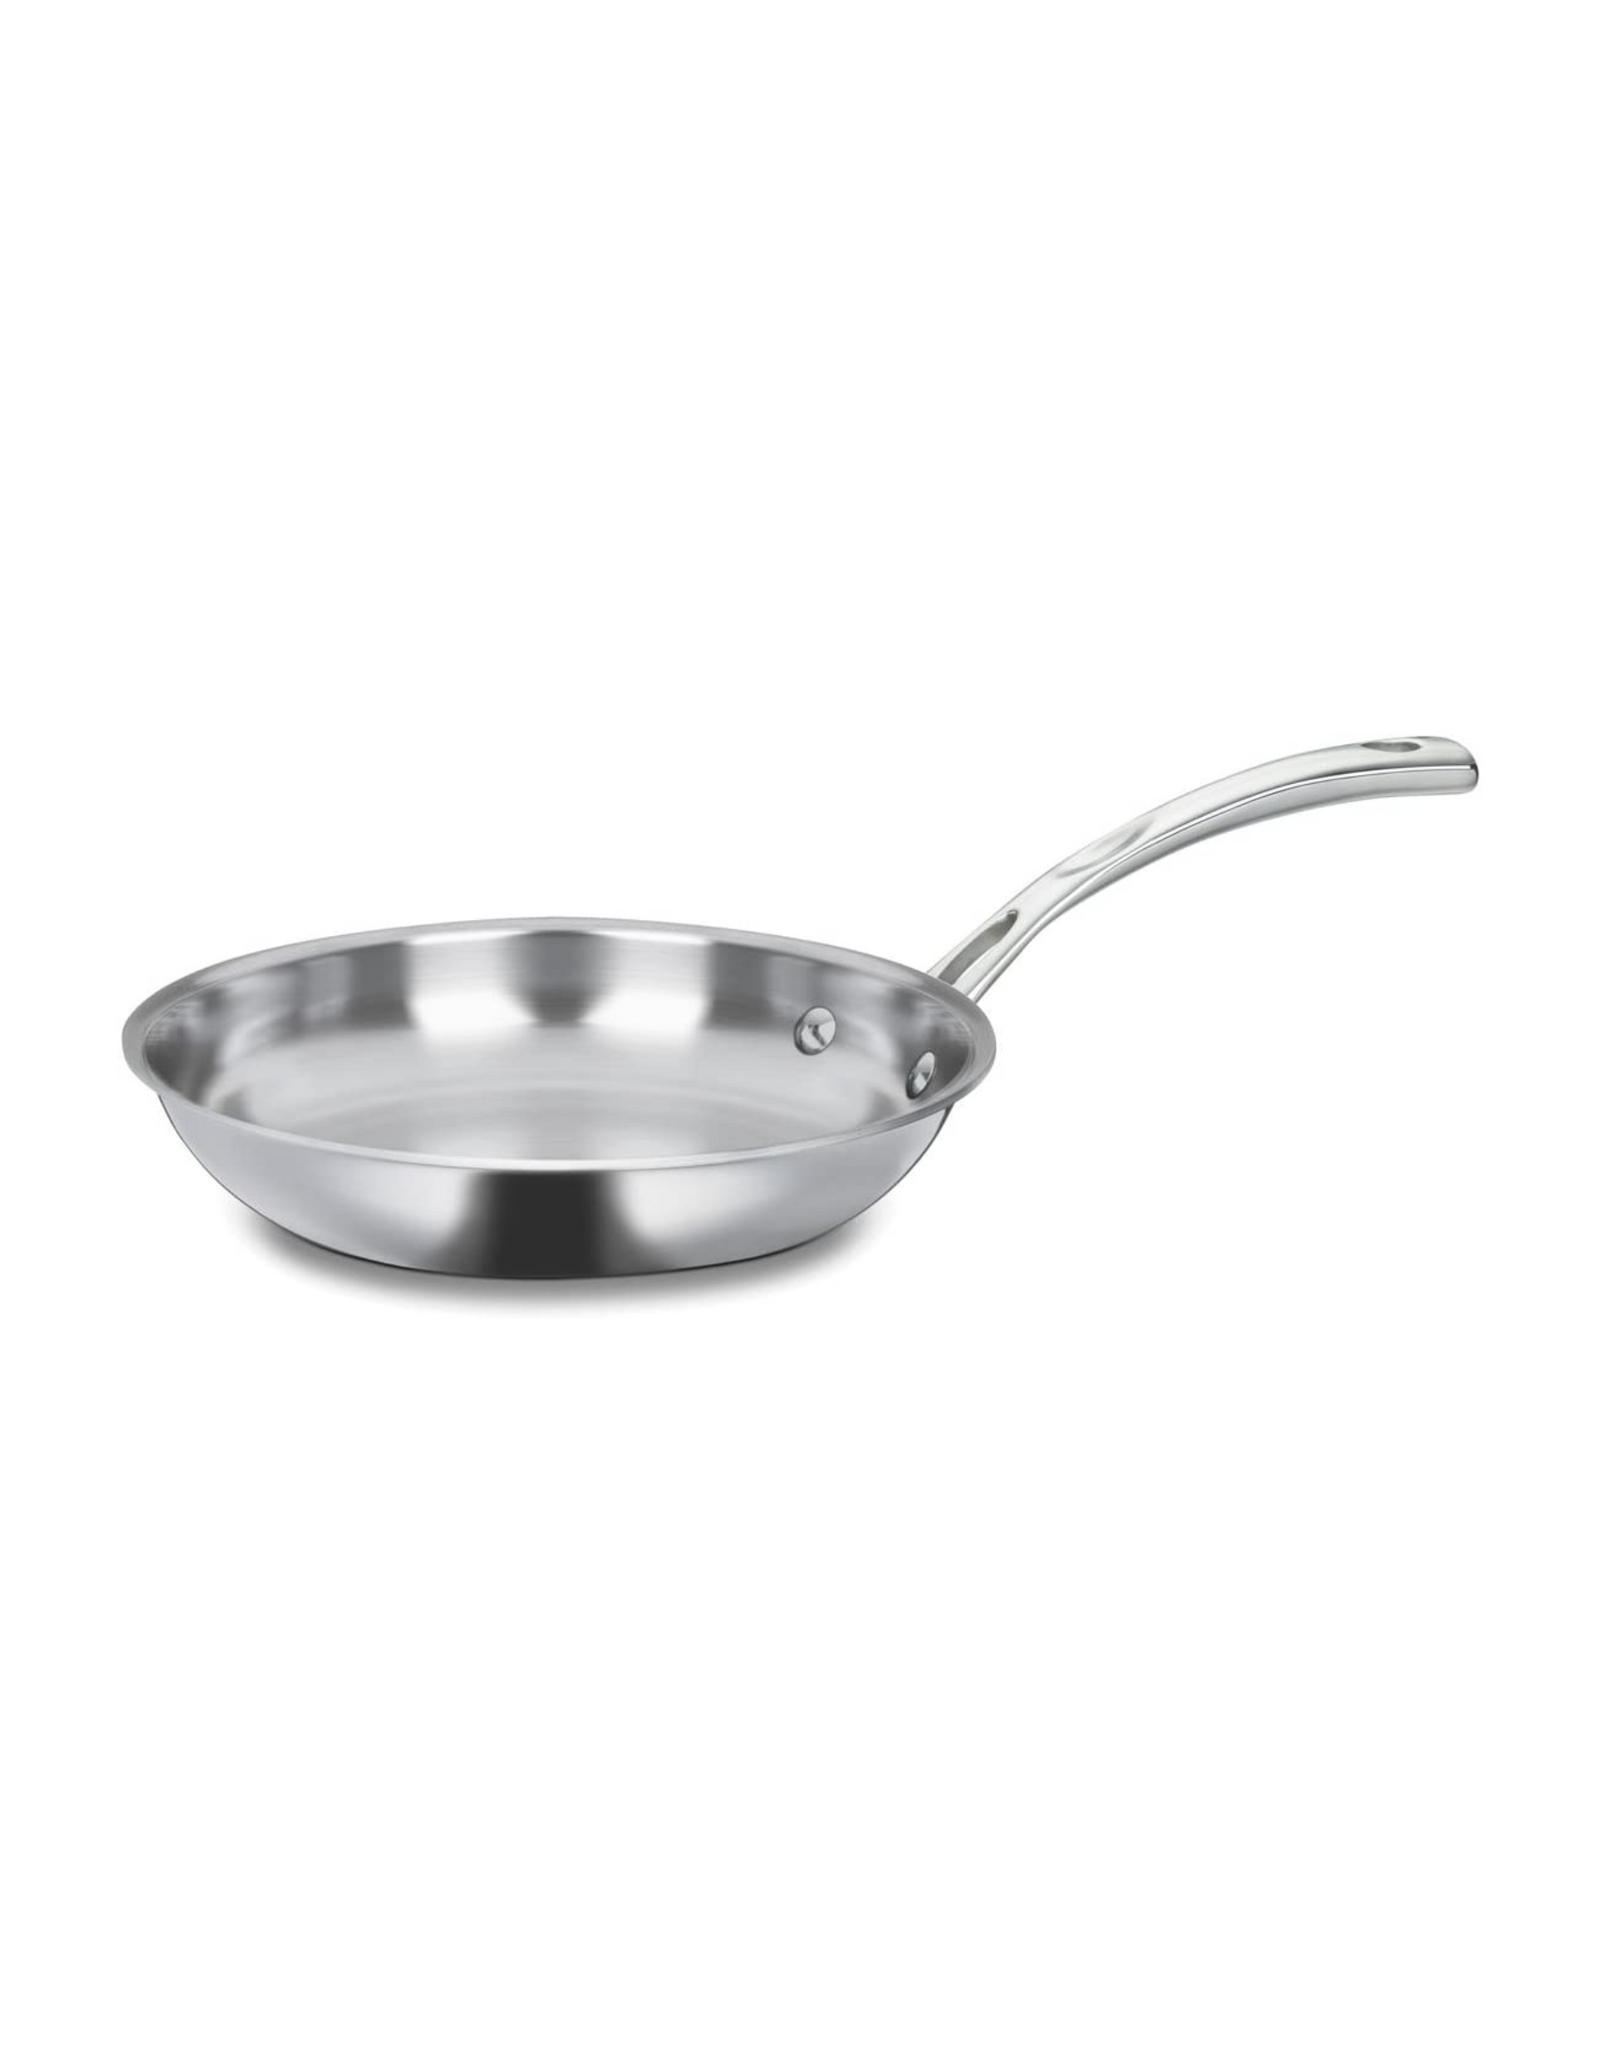 Cuisinart French Classic Tri-Ply Stainless Fry Pan, 8-Inch